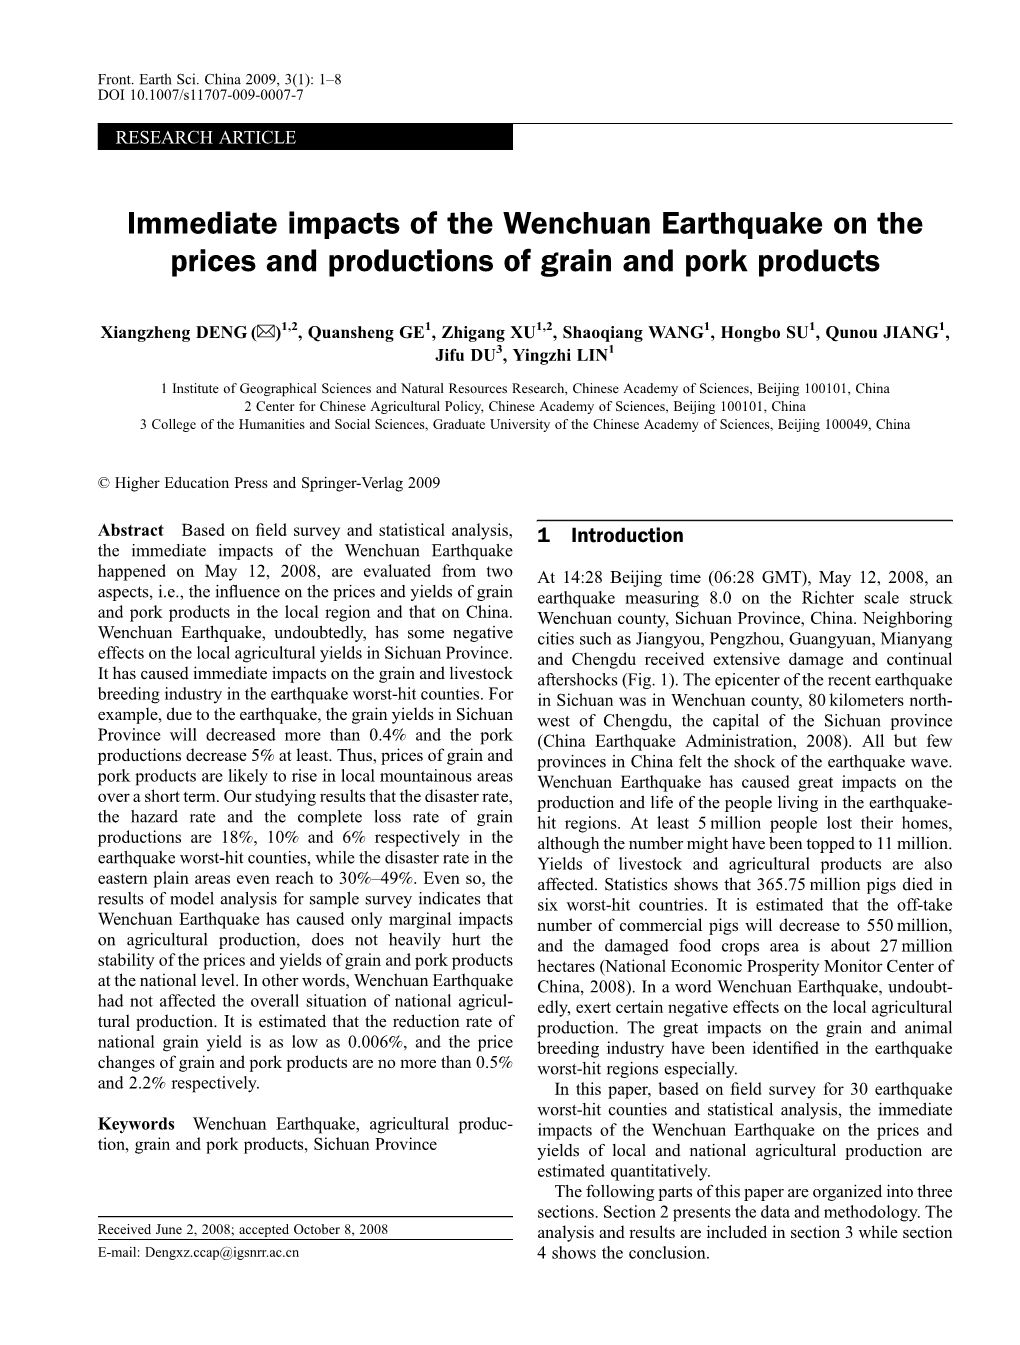 Immediate Impacts of the Wenchuan Earthquake on the Prices and Productions of Grain and Pork Products